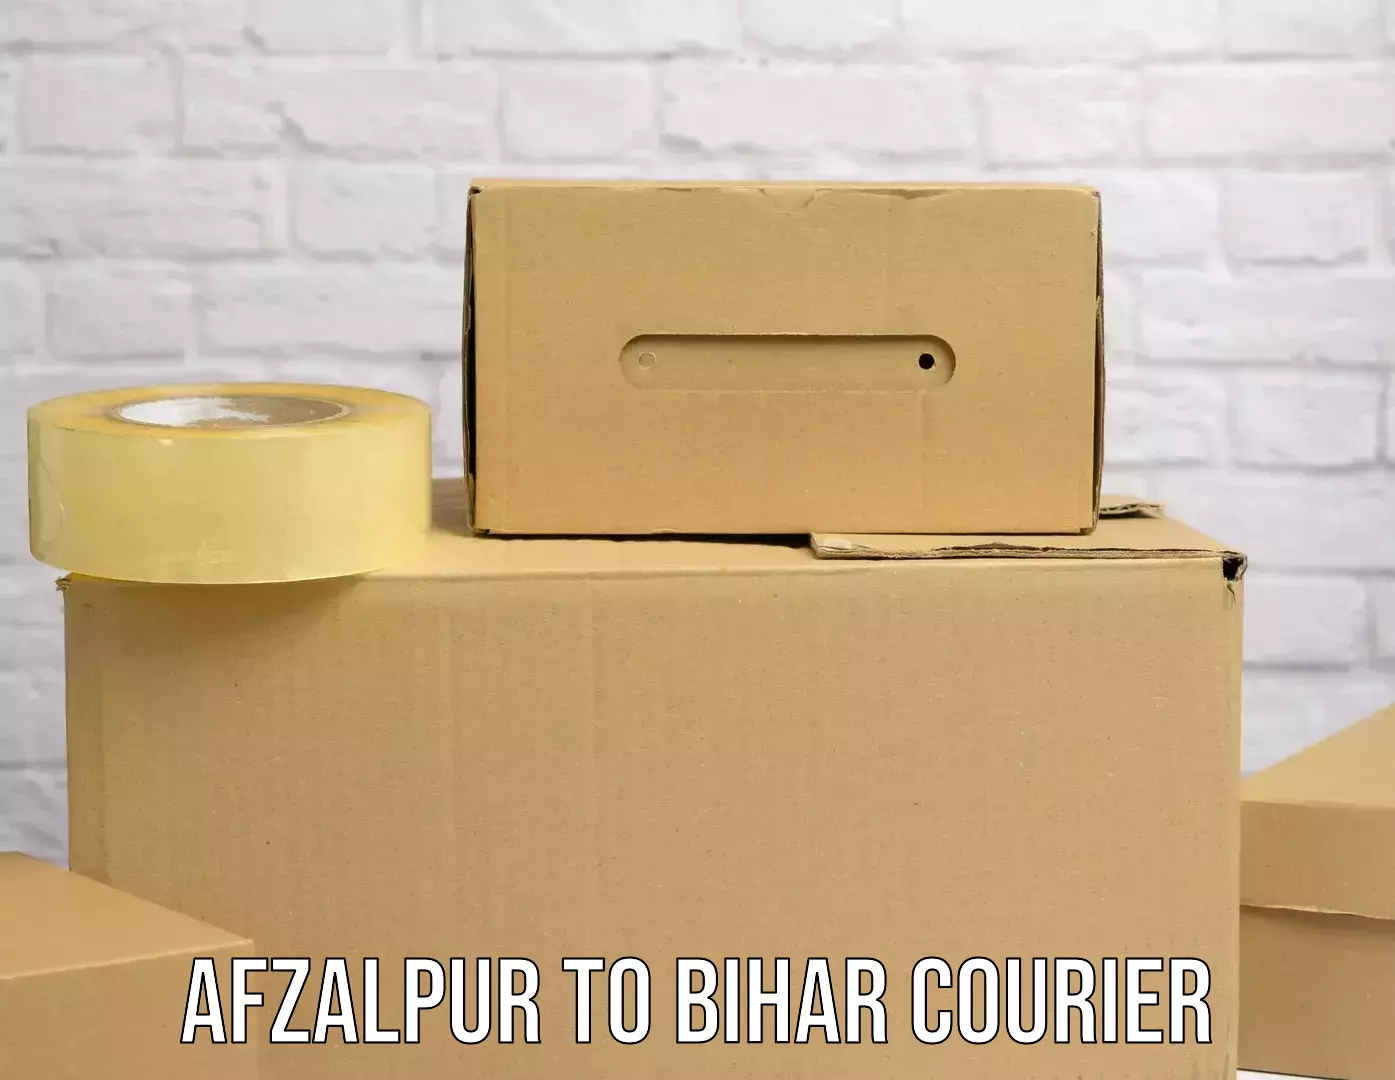 Next-day freight services Afzalpur to Biraul